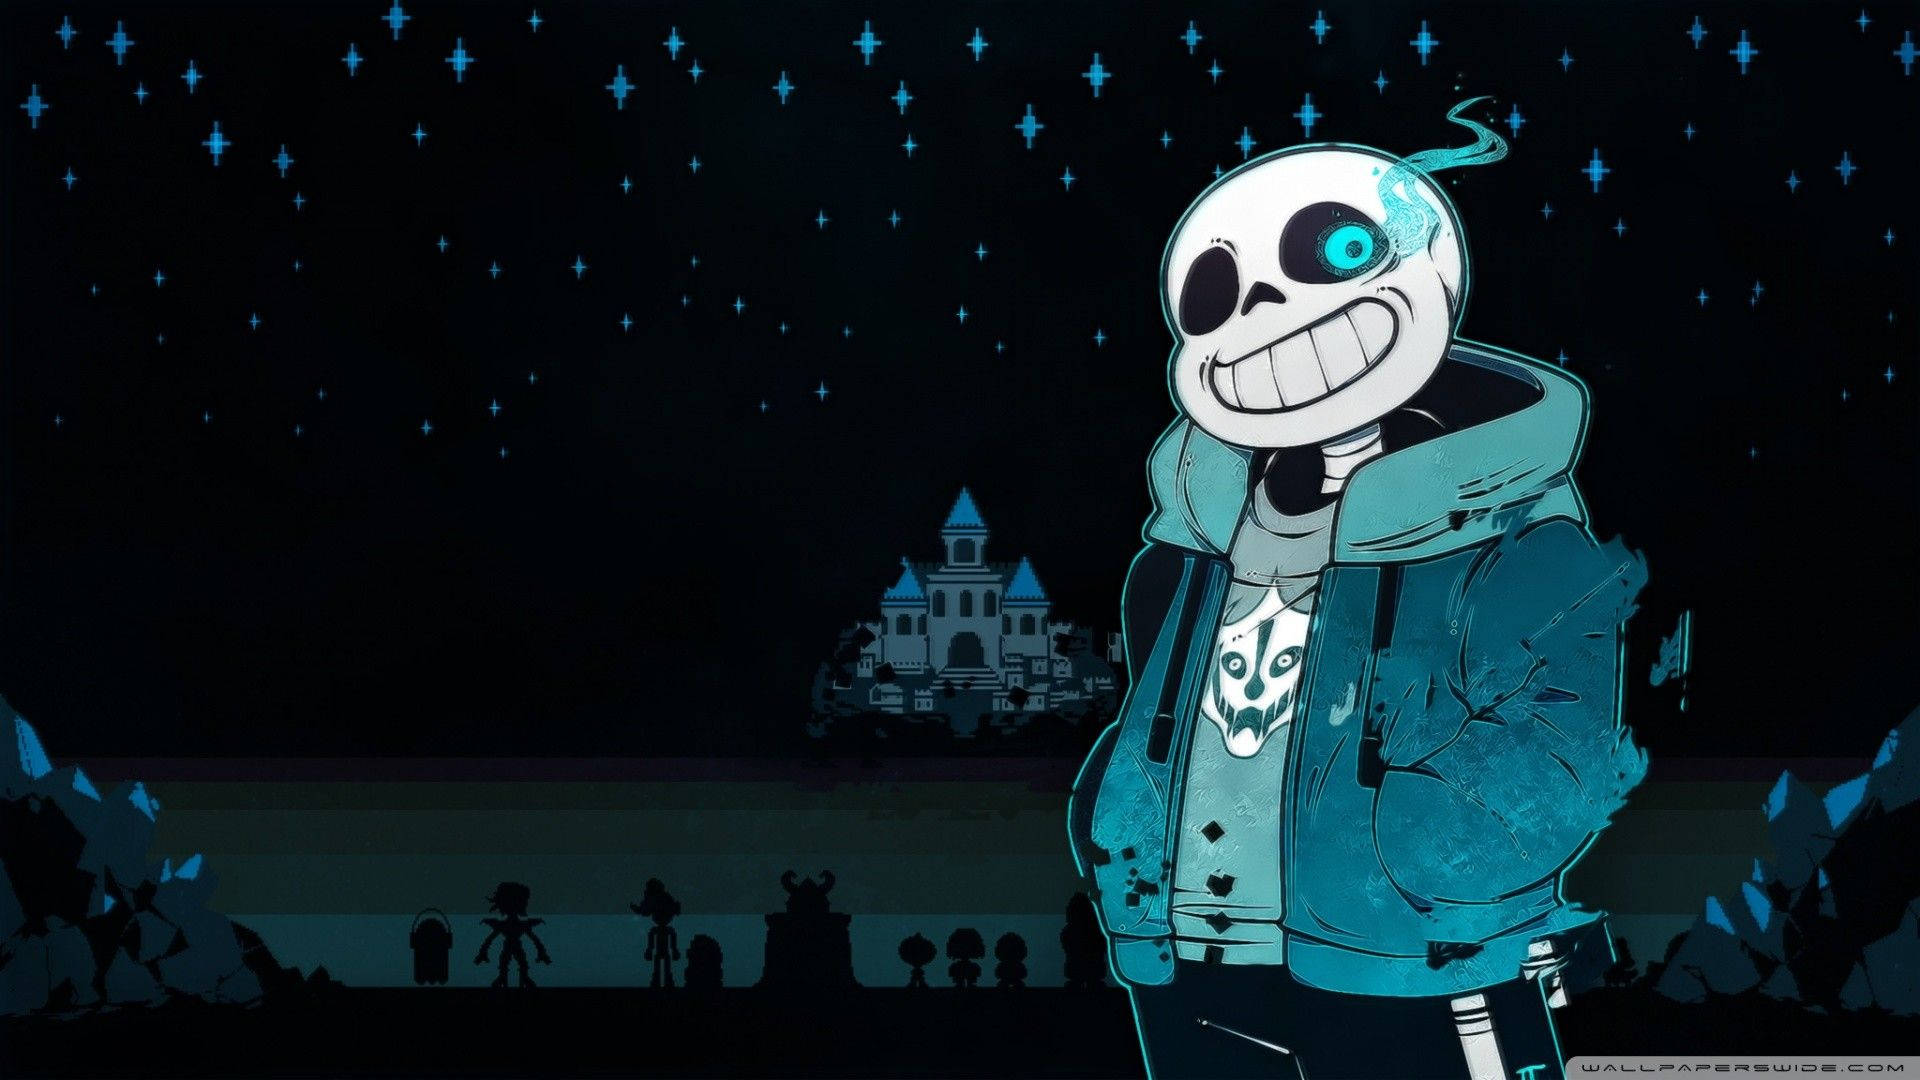 Undertale 1920X1080 Wallpaper and Background Image